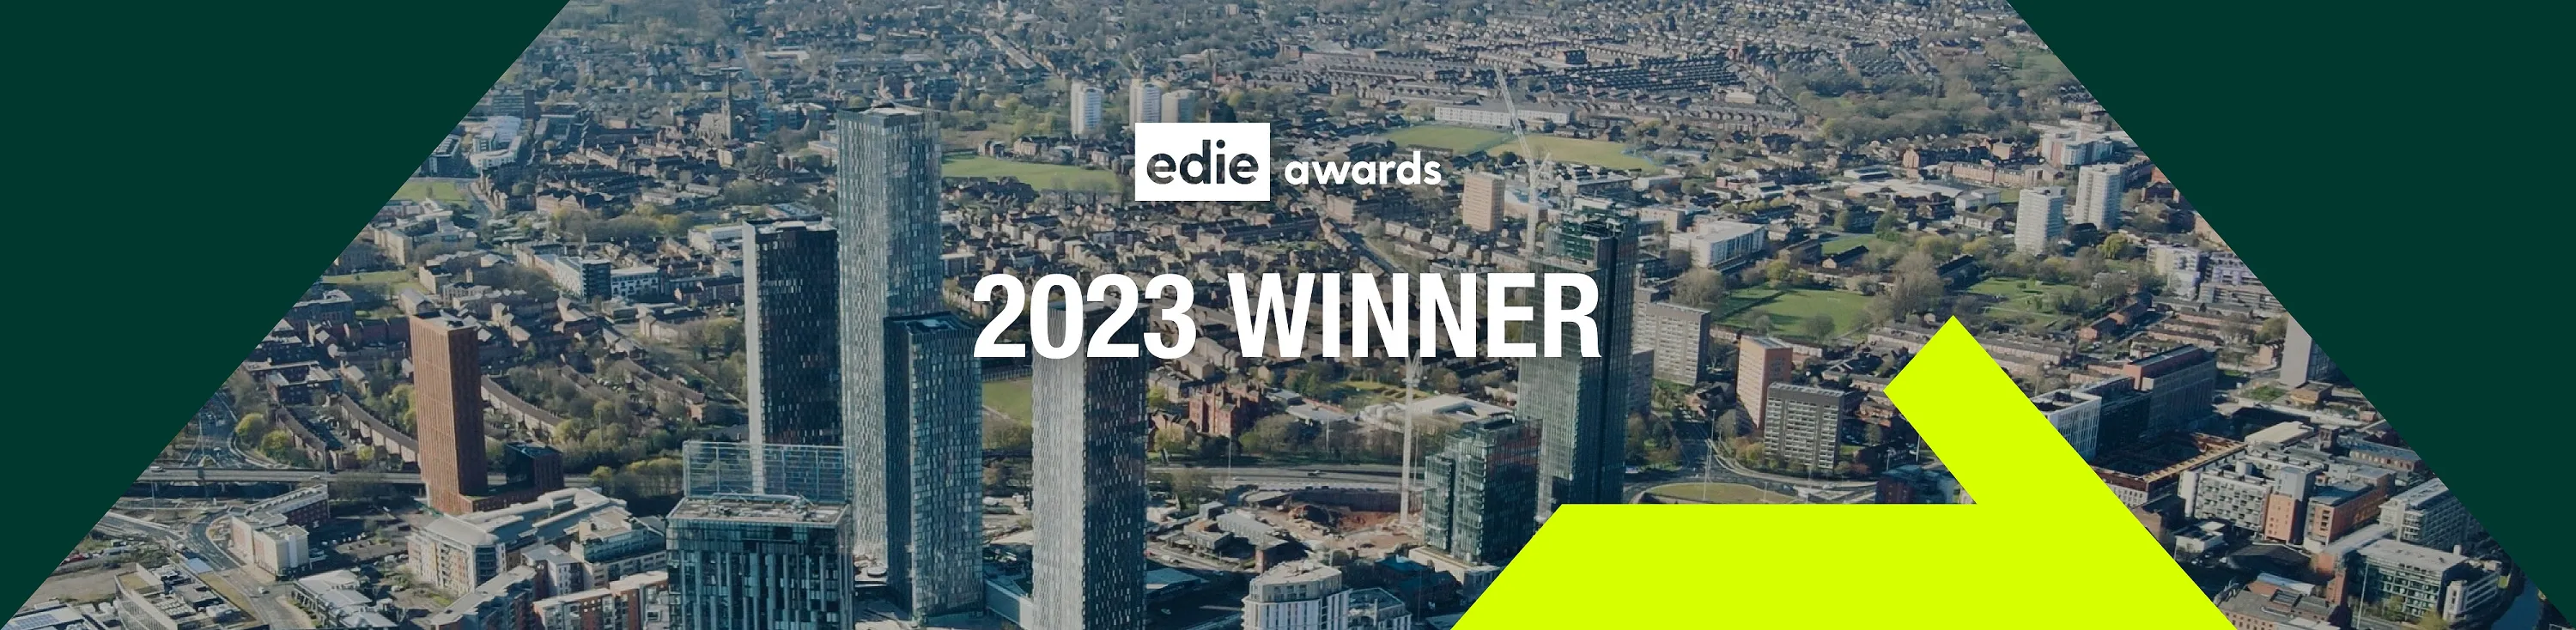 EDIE award winners for product of the year 2023